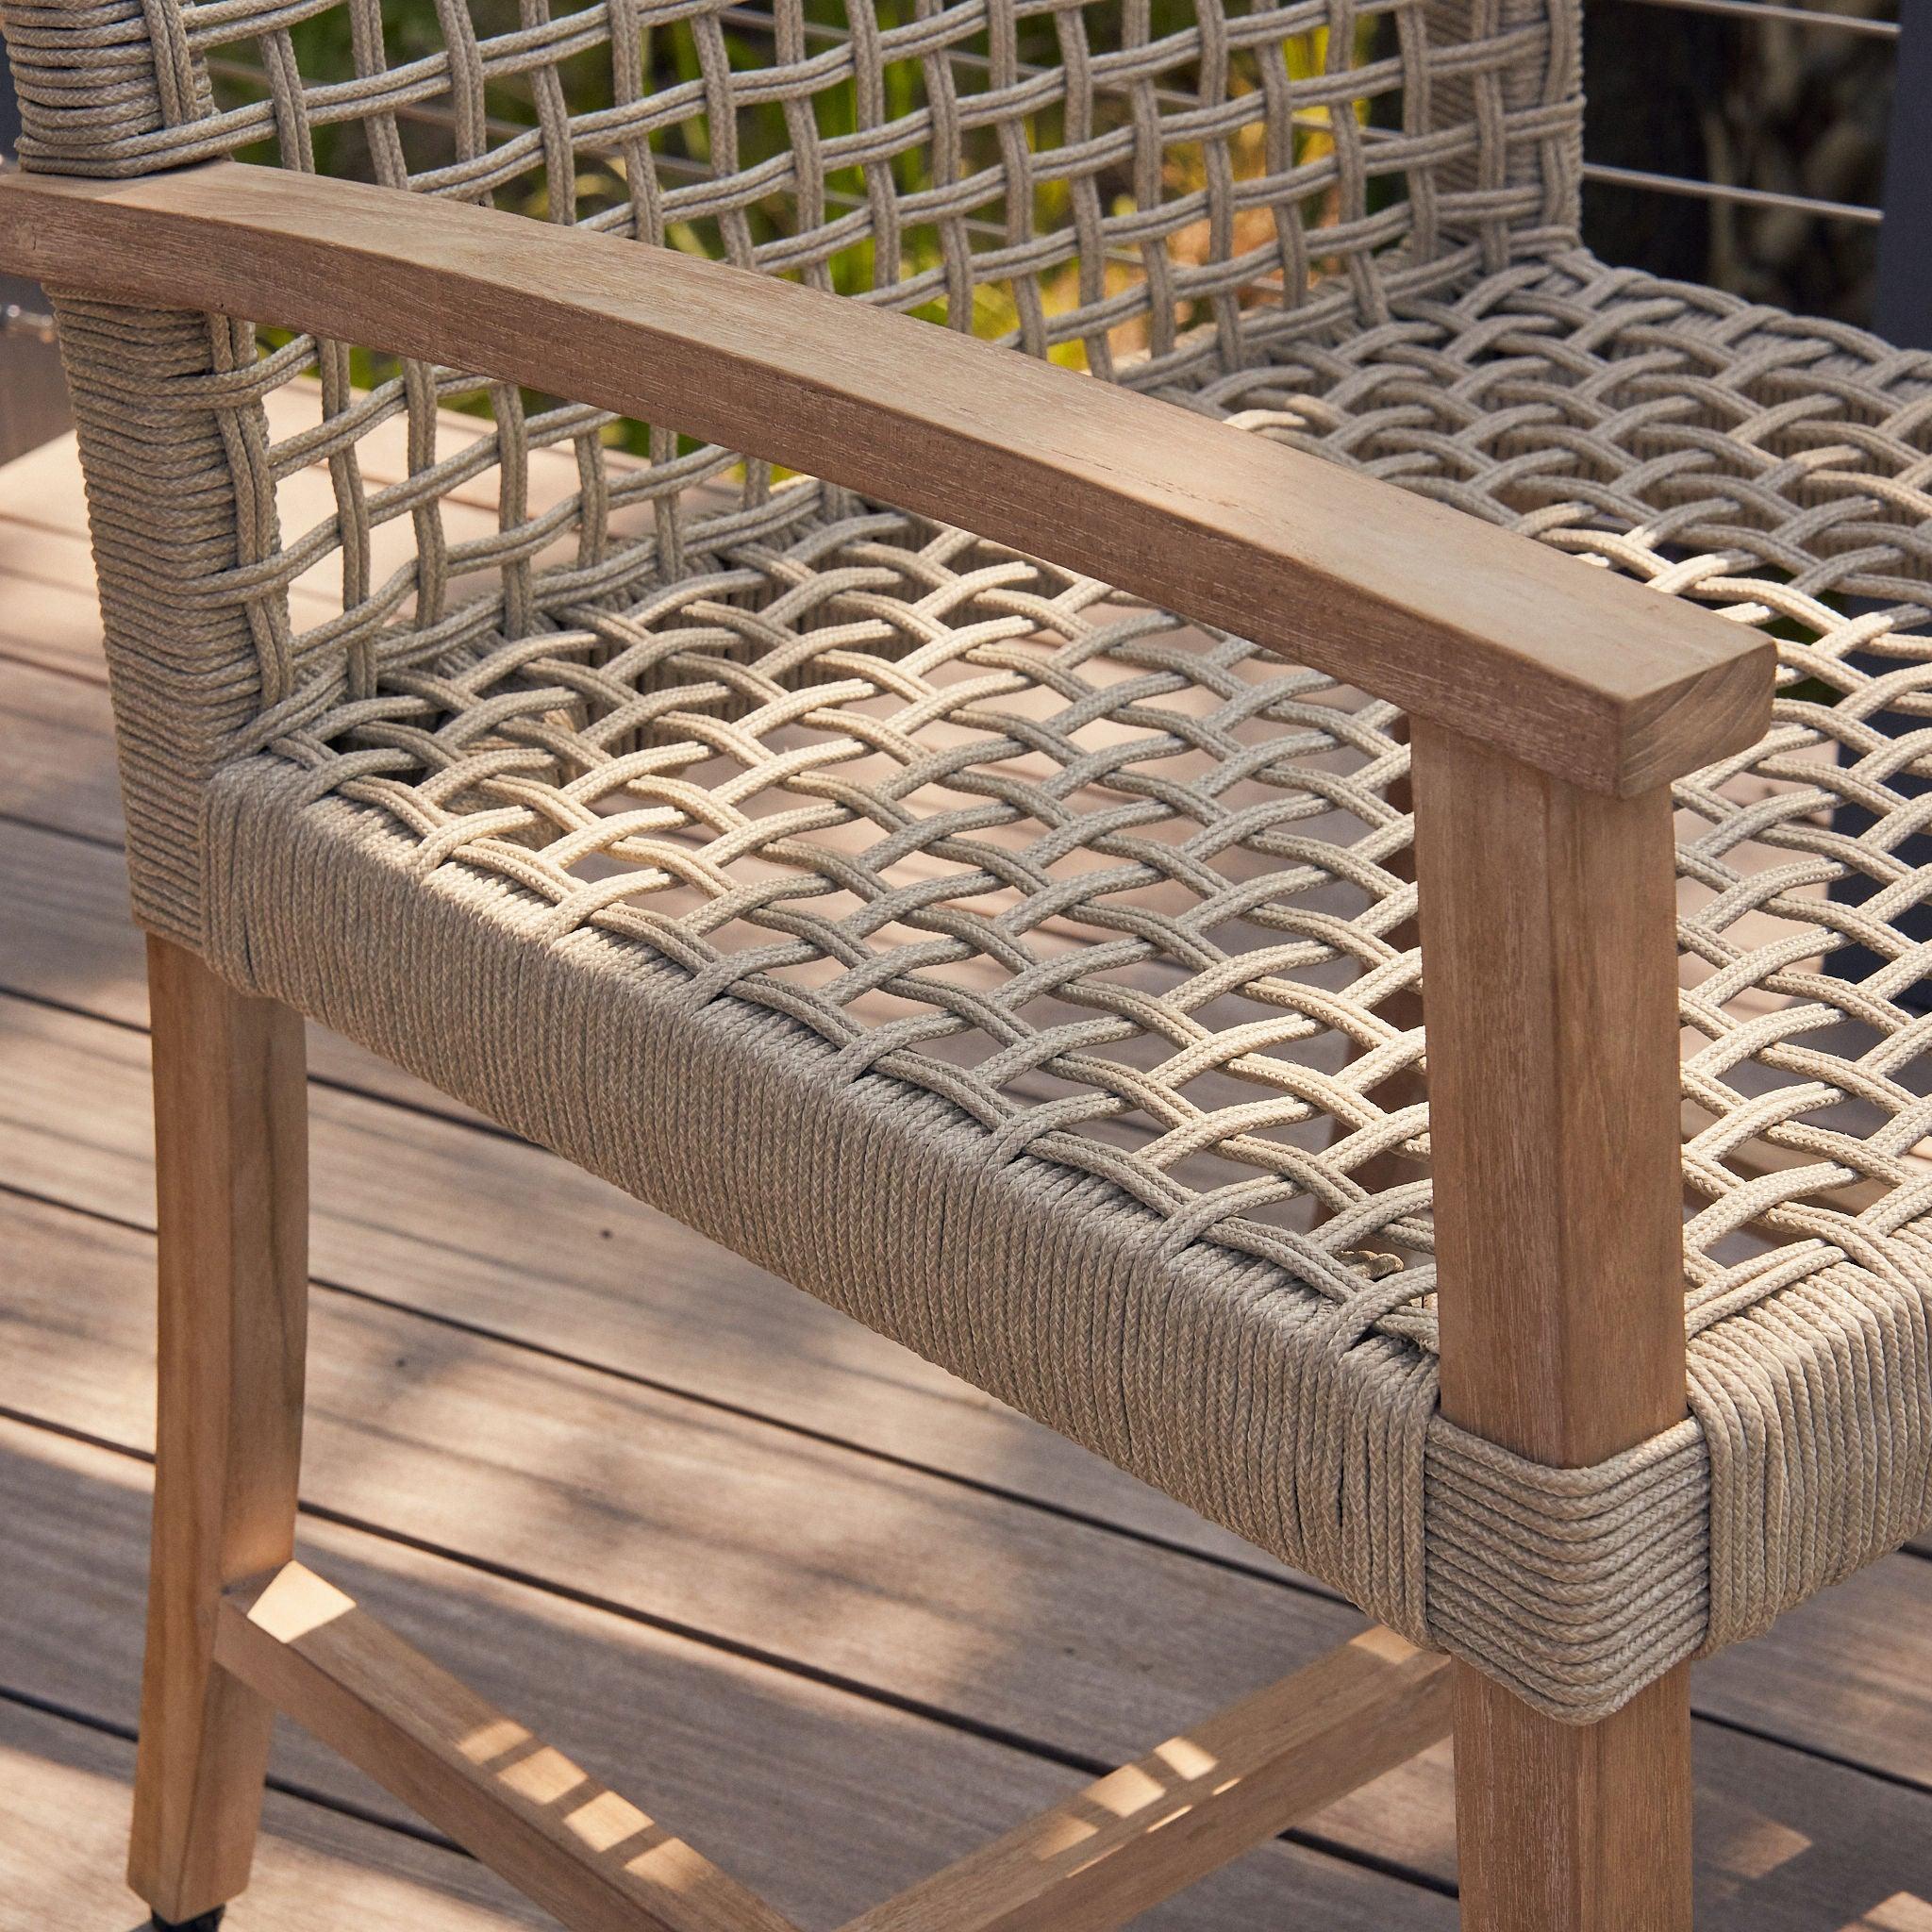 Highest Quality Outdoor Seward Rope Chair